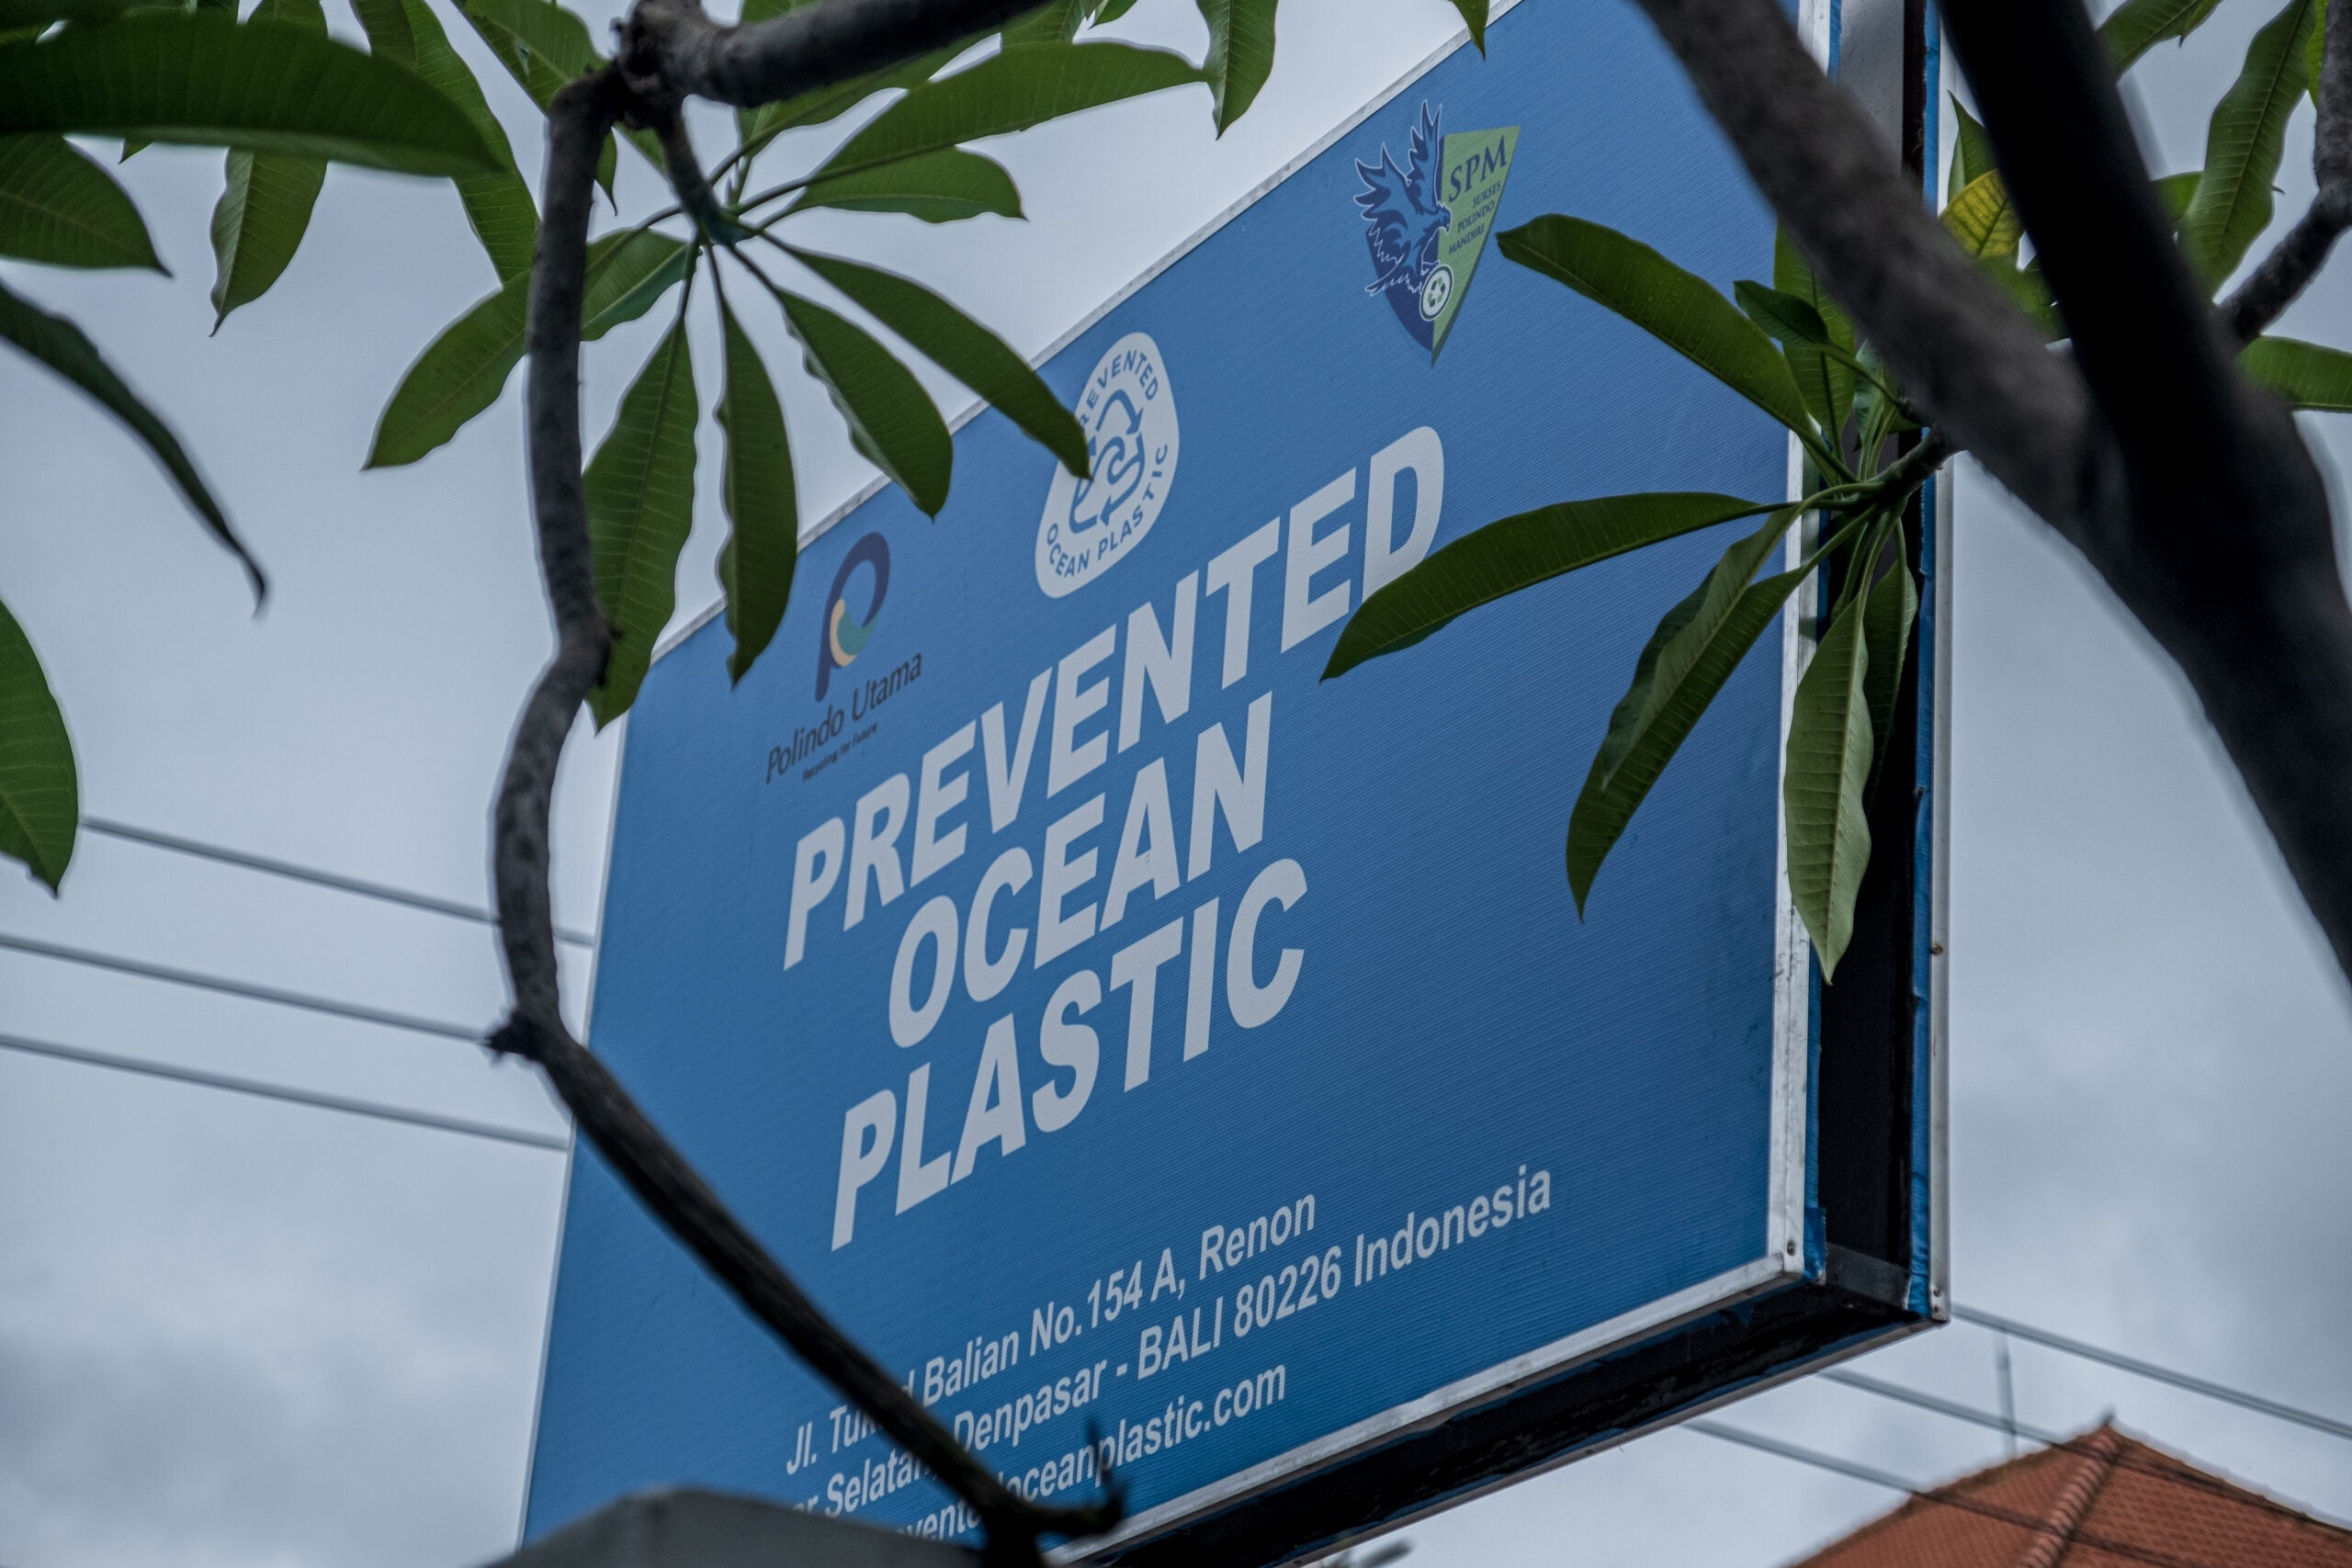 Consumers support better plastic choices ⁠— now businesses must do more